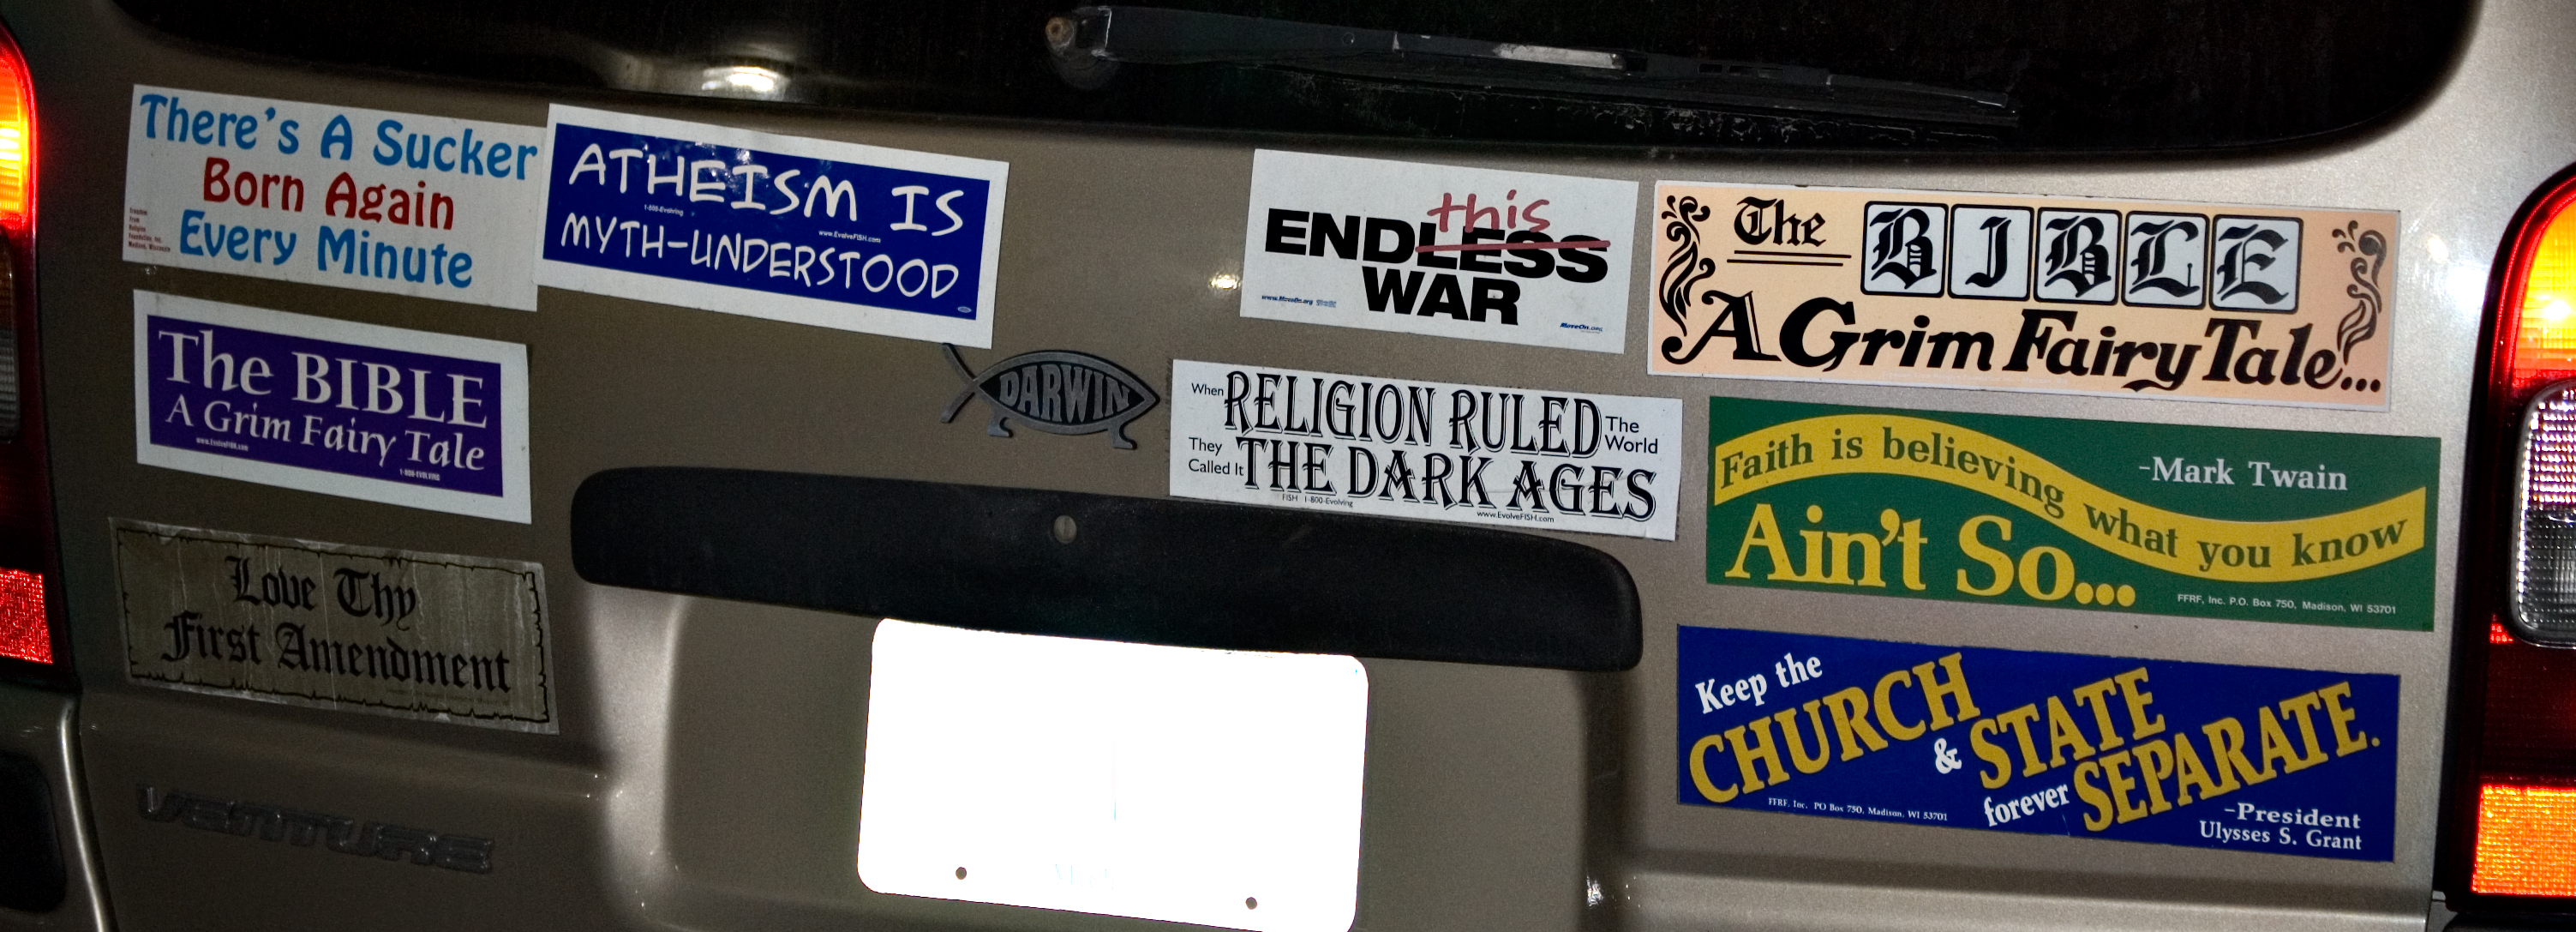 the back end of a car with bumper stickers on it